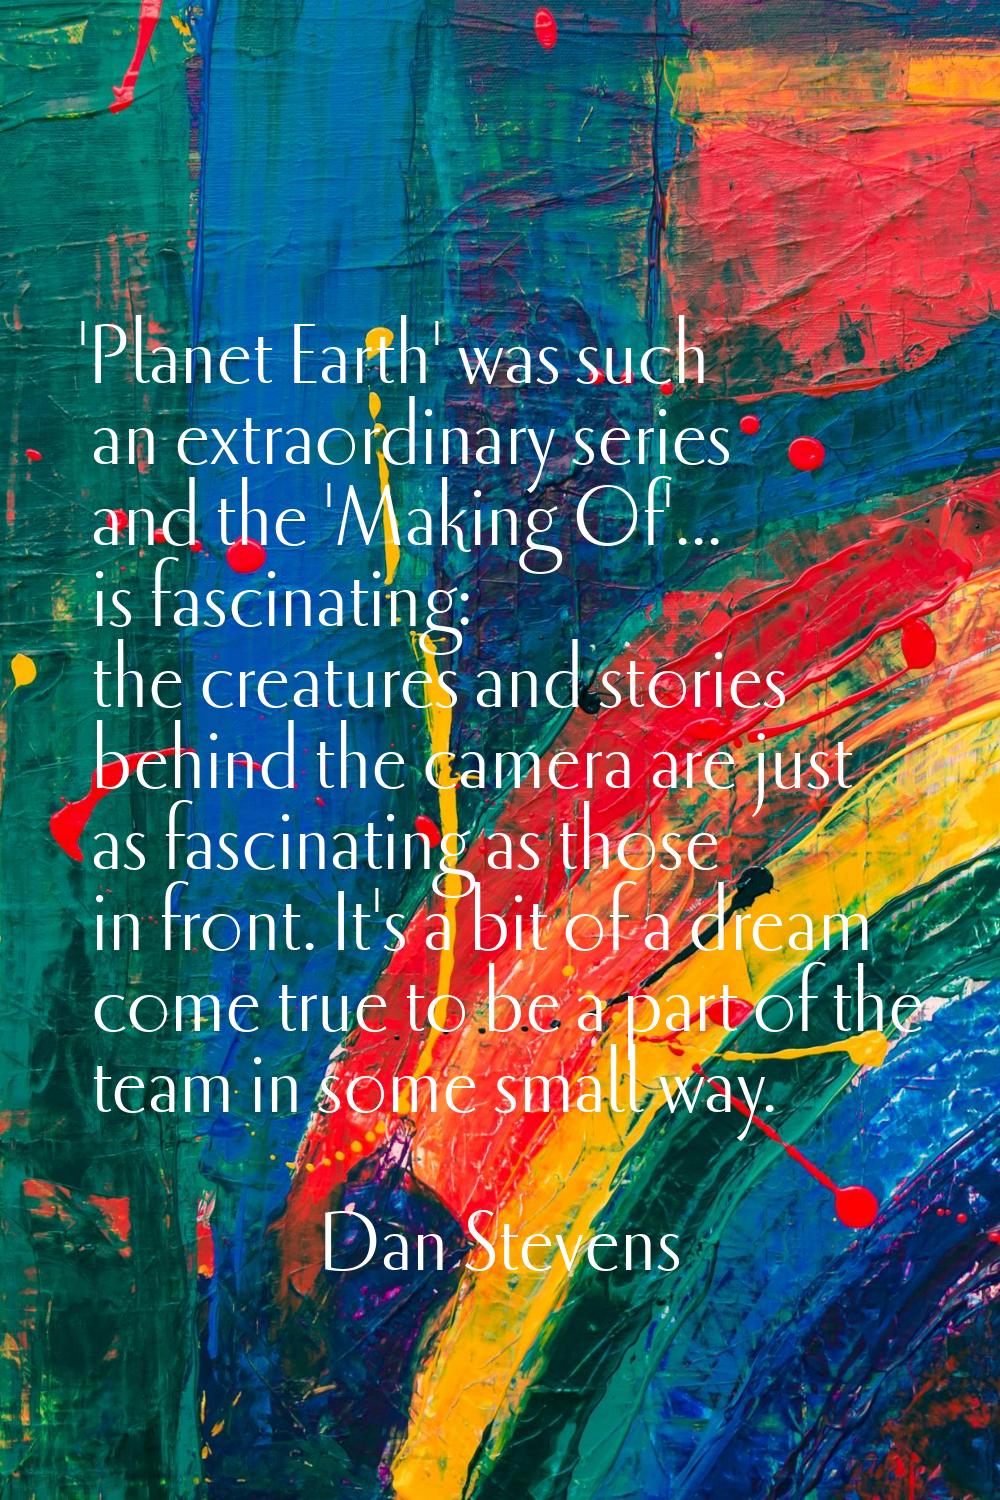 'Planet Earth' was such an extraordinary series and the 'Making Of'... is fascinating: the creature